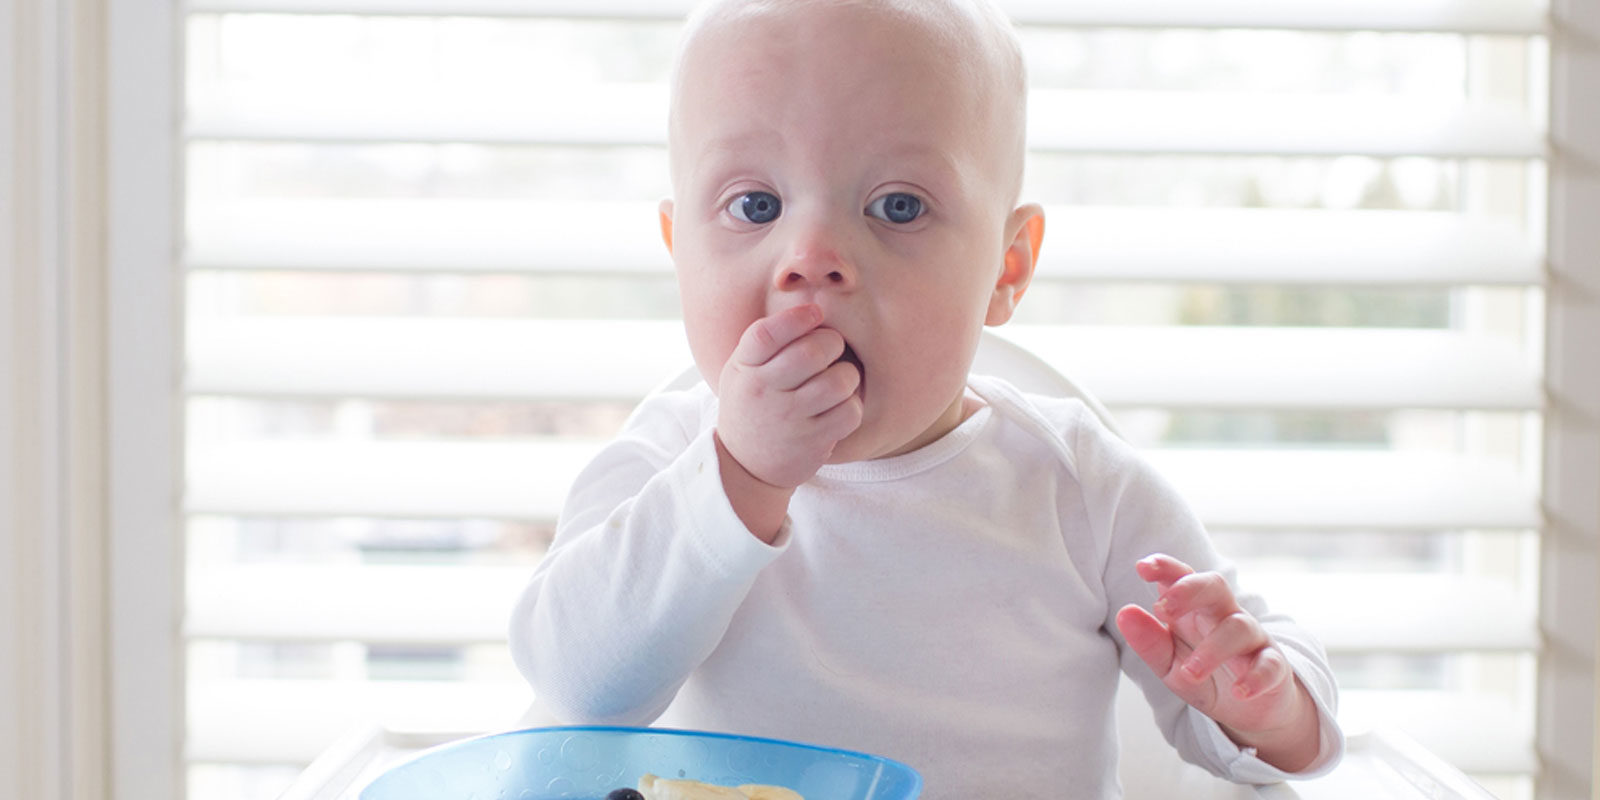 Beginner's Guide to Baby-Led Weaning